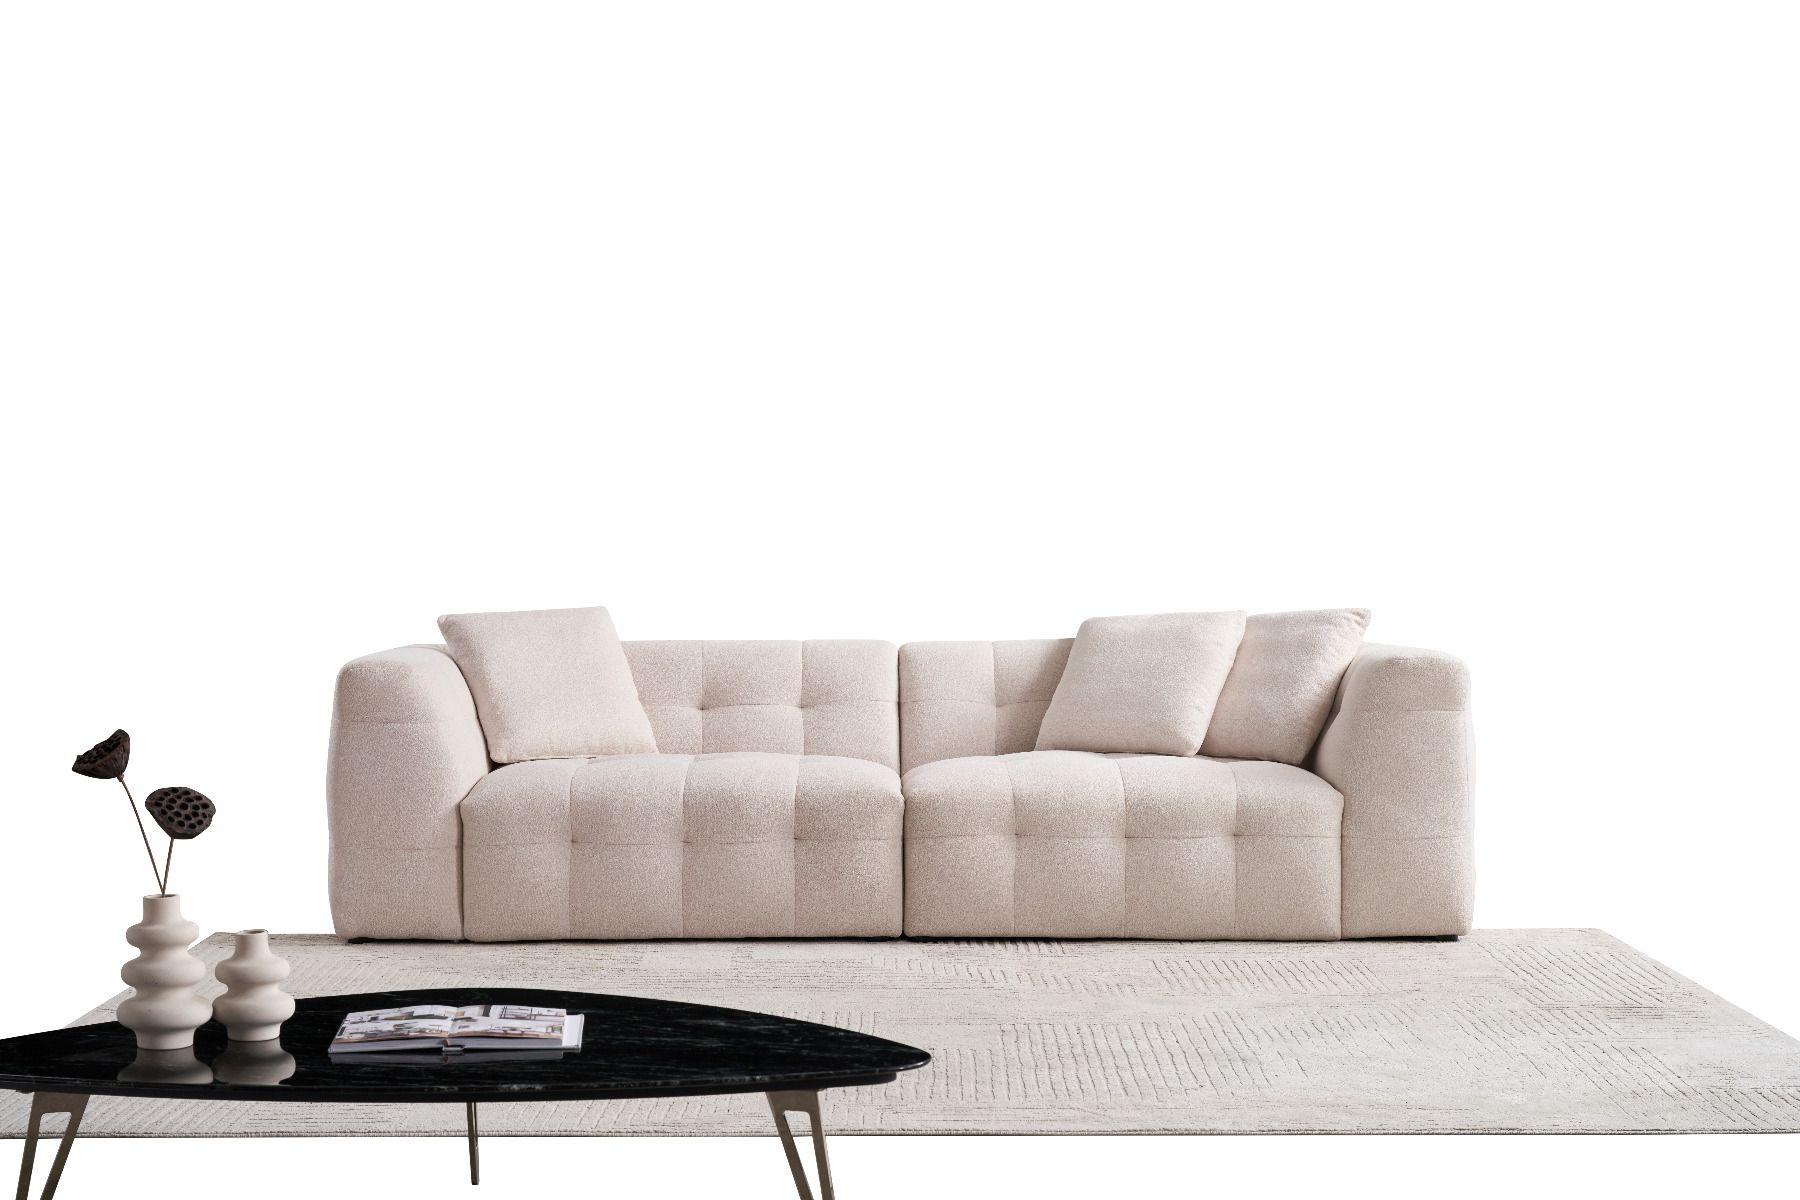 Contemporary Extra Long Sofa AE-D838-IV-4S AE-D838-IV-4S in Ivory Fabric